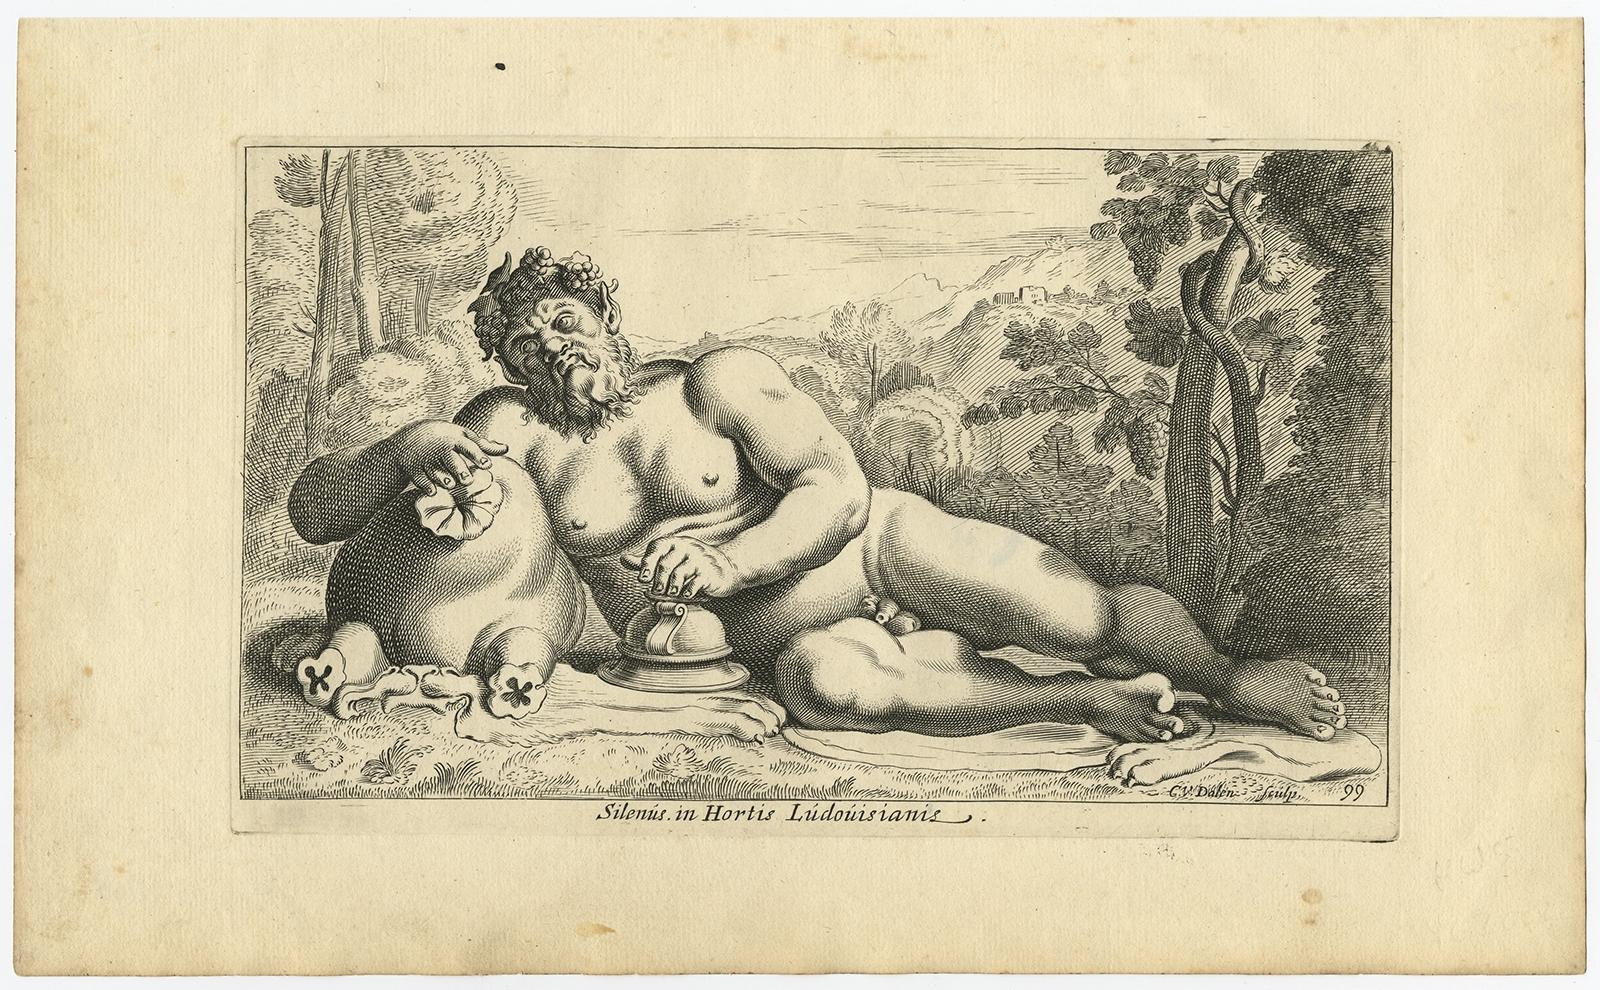 Antique print, titled: 'Silenus in Hortis Ludovisianis.' 

Statue of Silenus in Rome. In Greek mythology, Silenus was a companion and tutor to the wine god Dionysus.

From the 1660 Dutch edition of 'Icones et Segmenta Nobil. Signorum et Statuarum